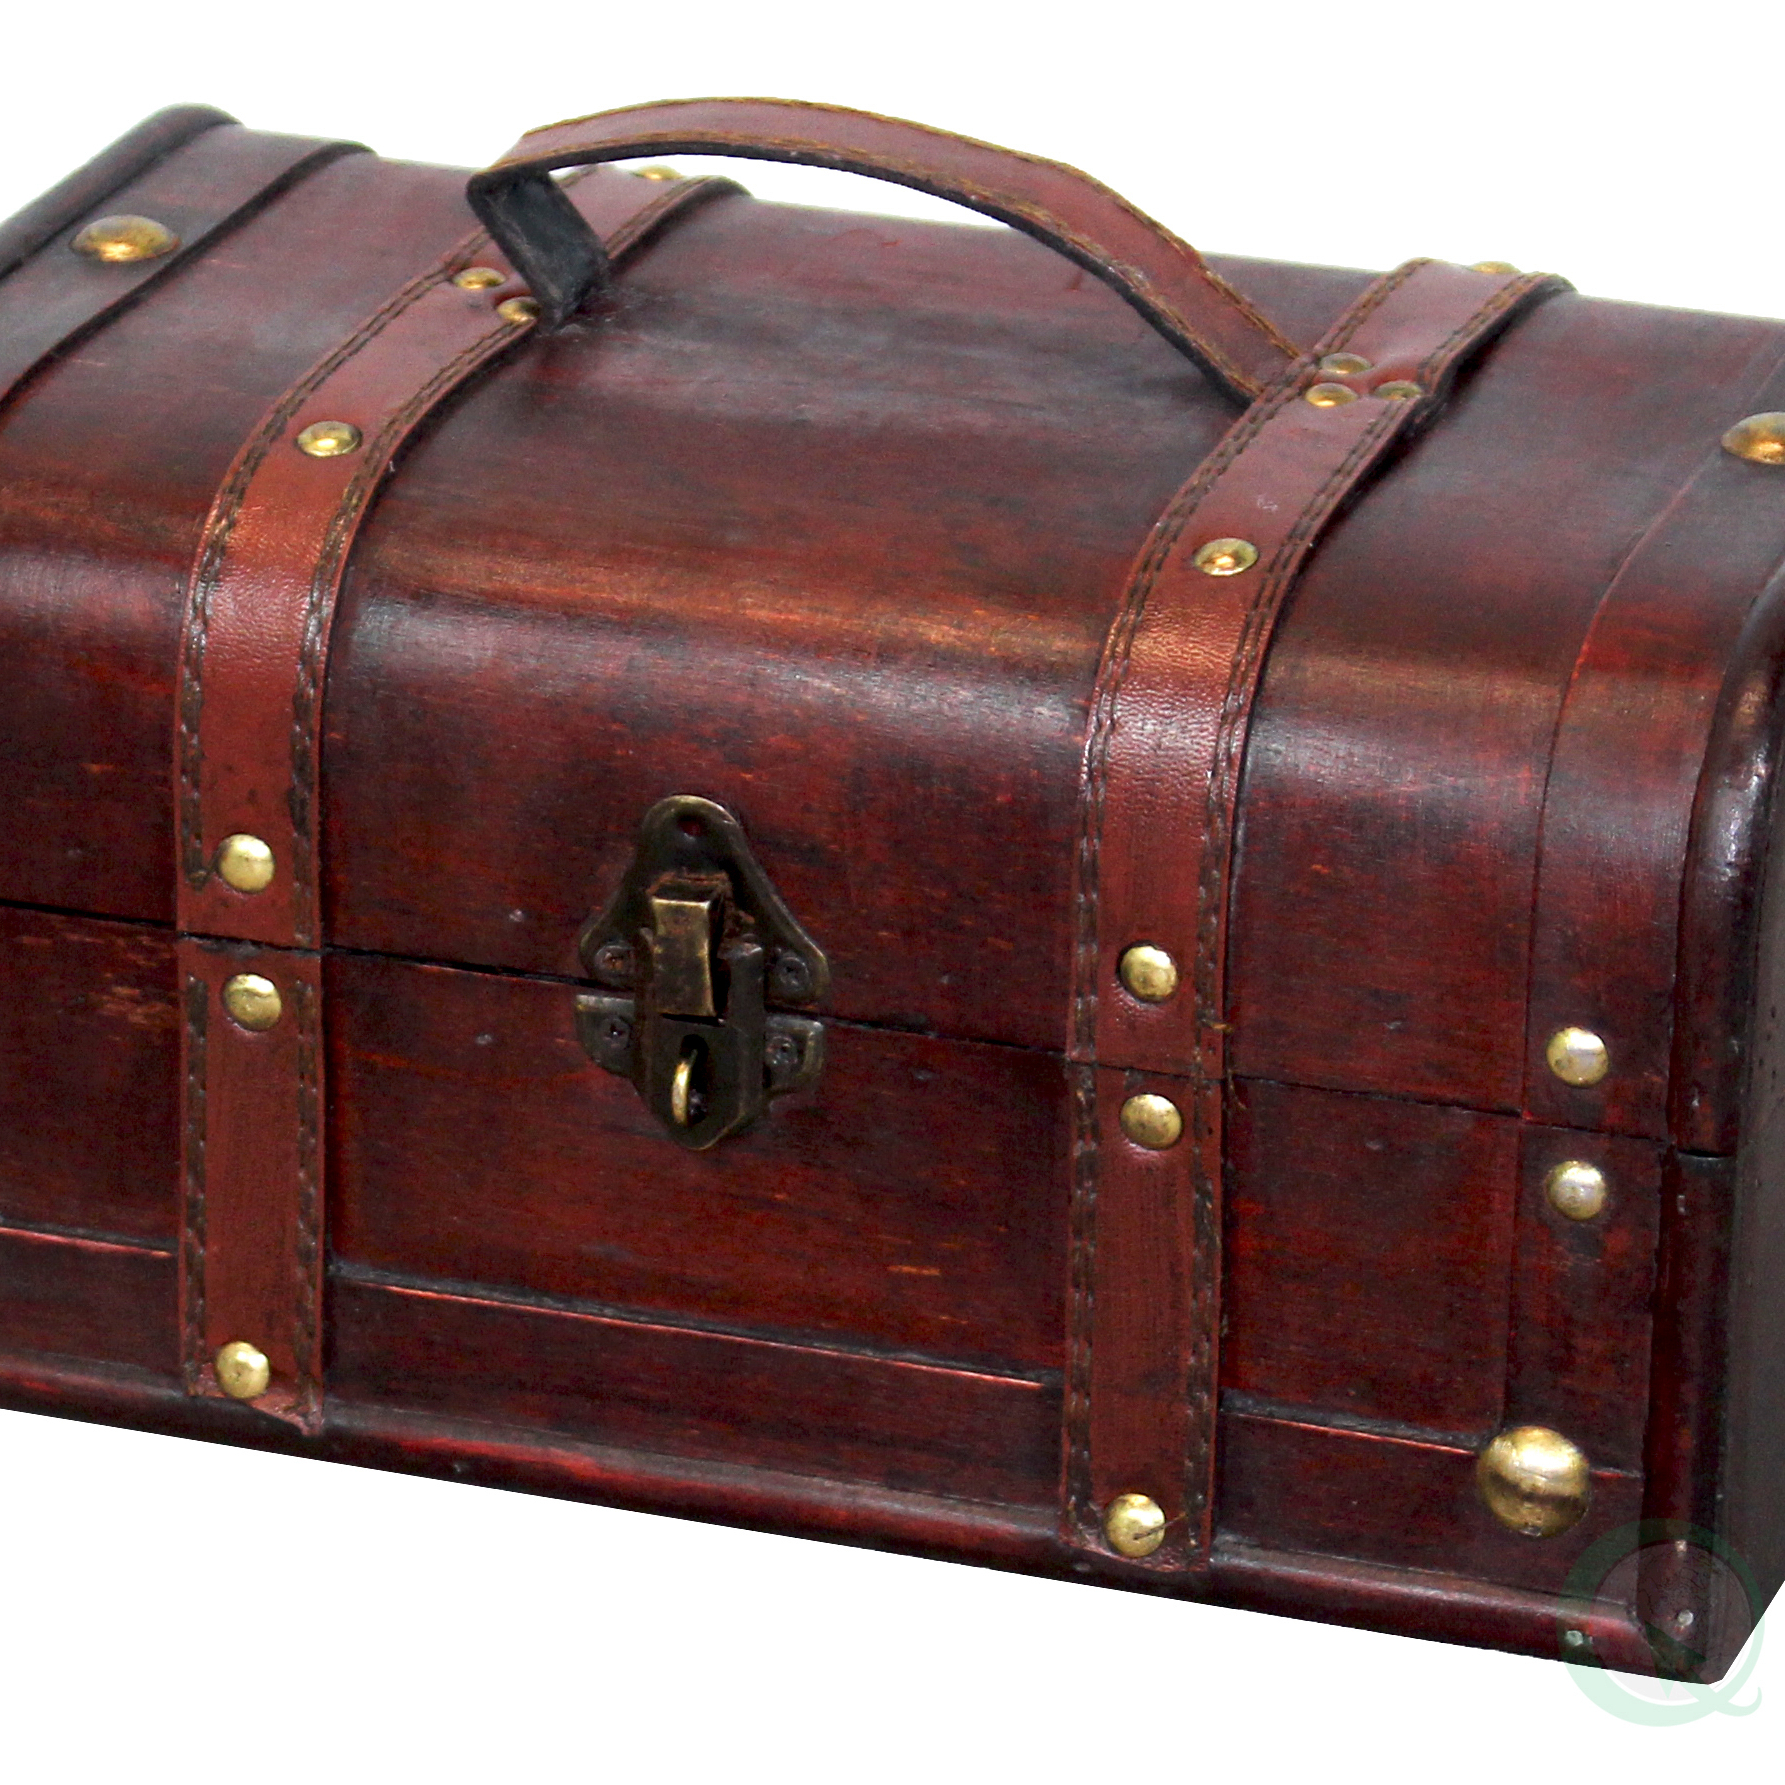 Decorative Vintage Wood Treasure Box - Wooden Trunk Chest With Handle - Chest